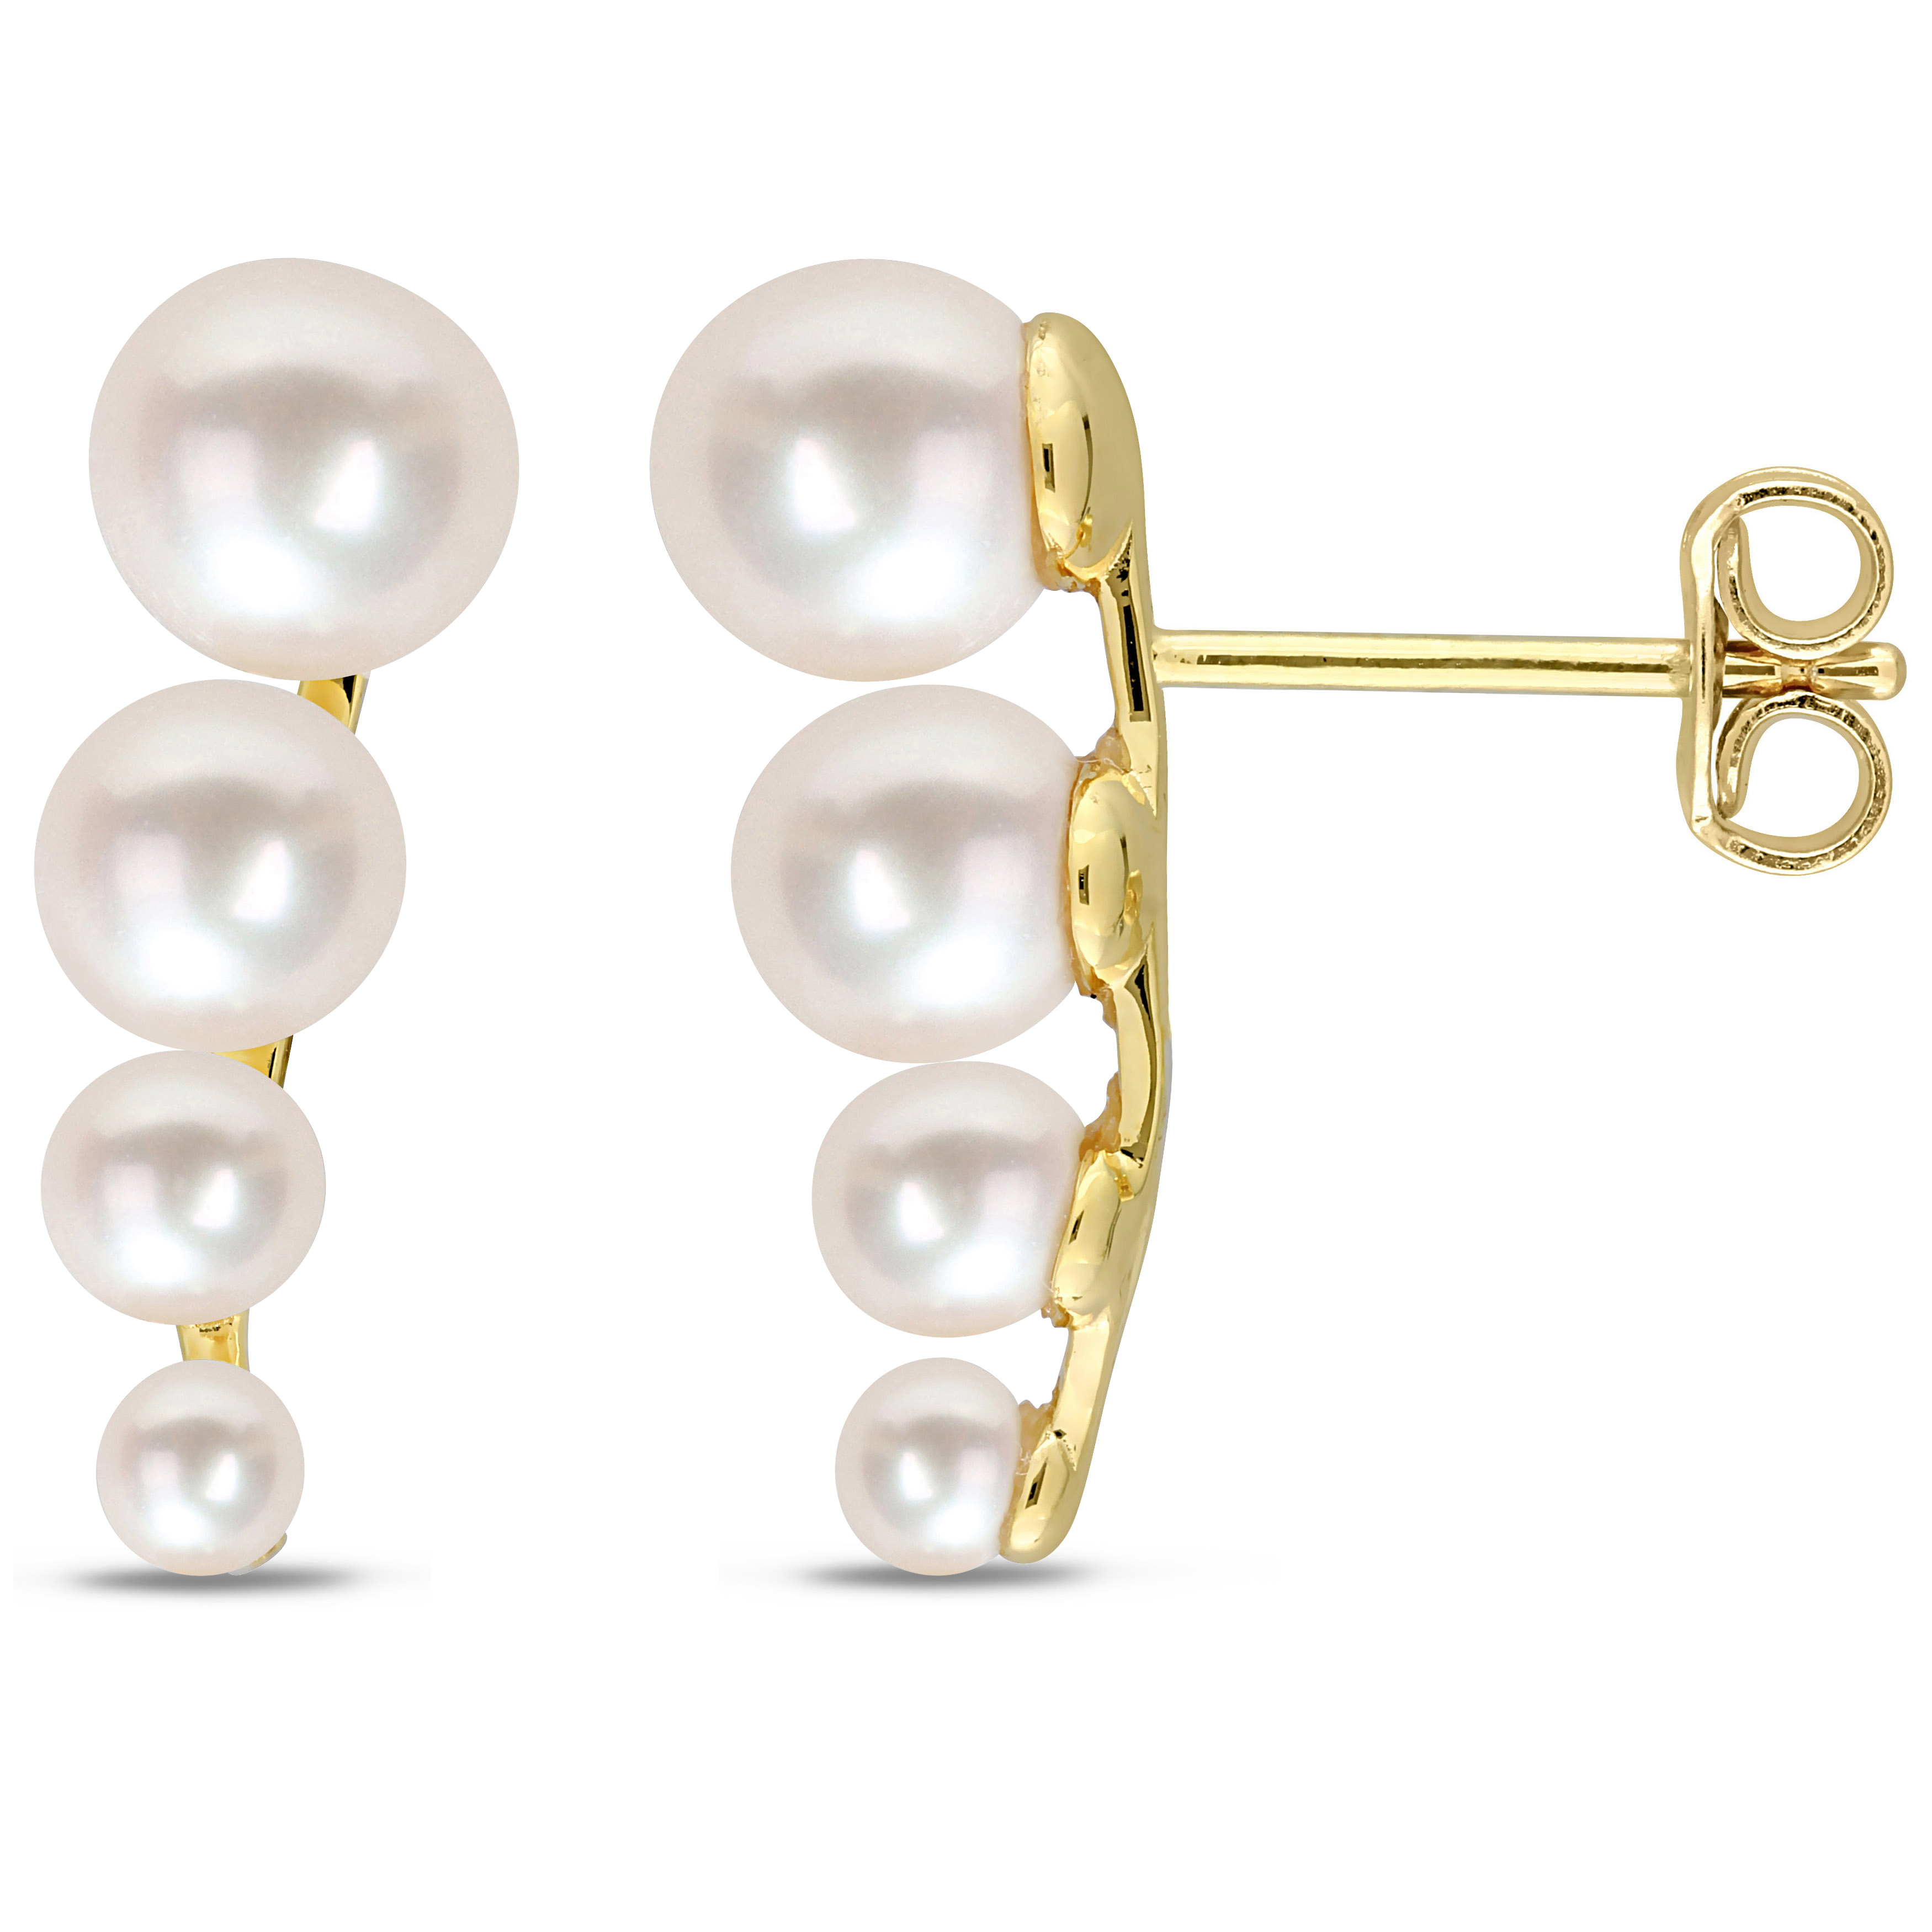 3 - 6.5 MM Freshwater Cultured Pearl Graduated Stud Earrings in Yellow Plated Sterling Silver